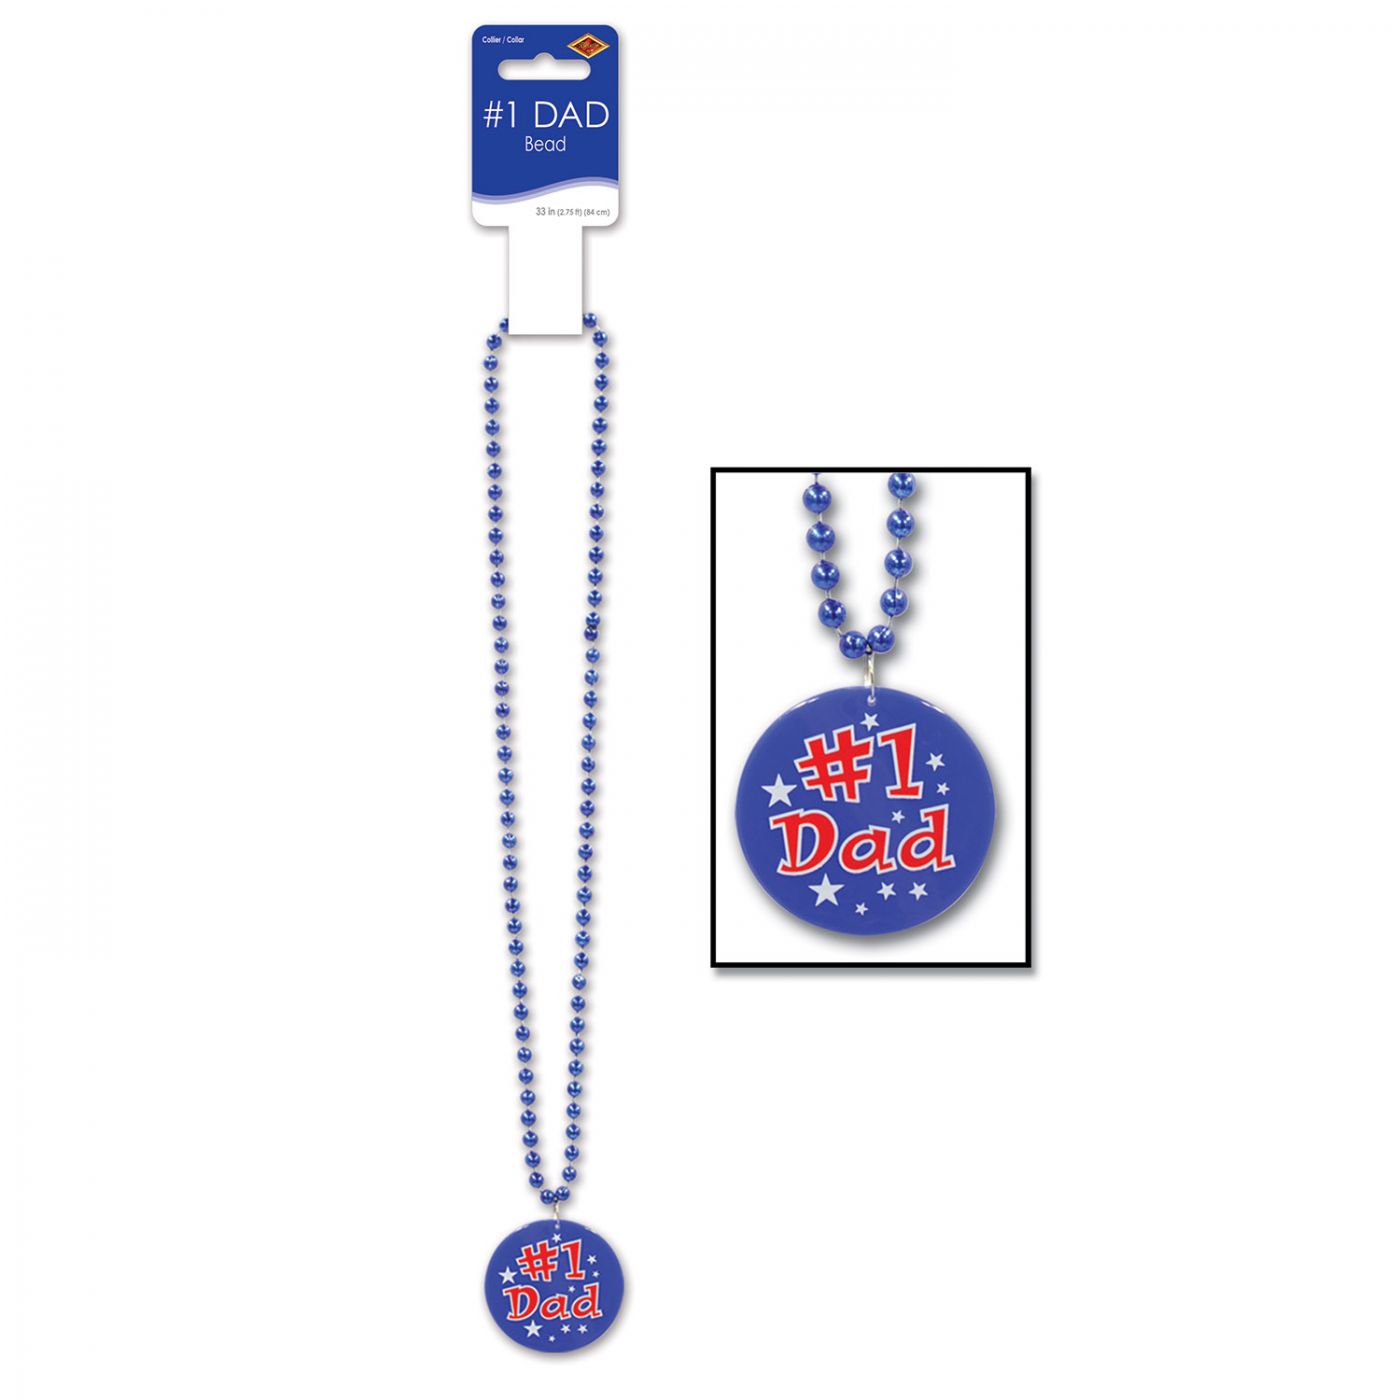 Image of Beads w/Printed #1 Dad Medallion (12)